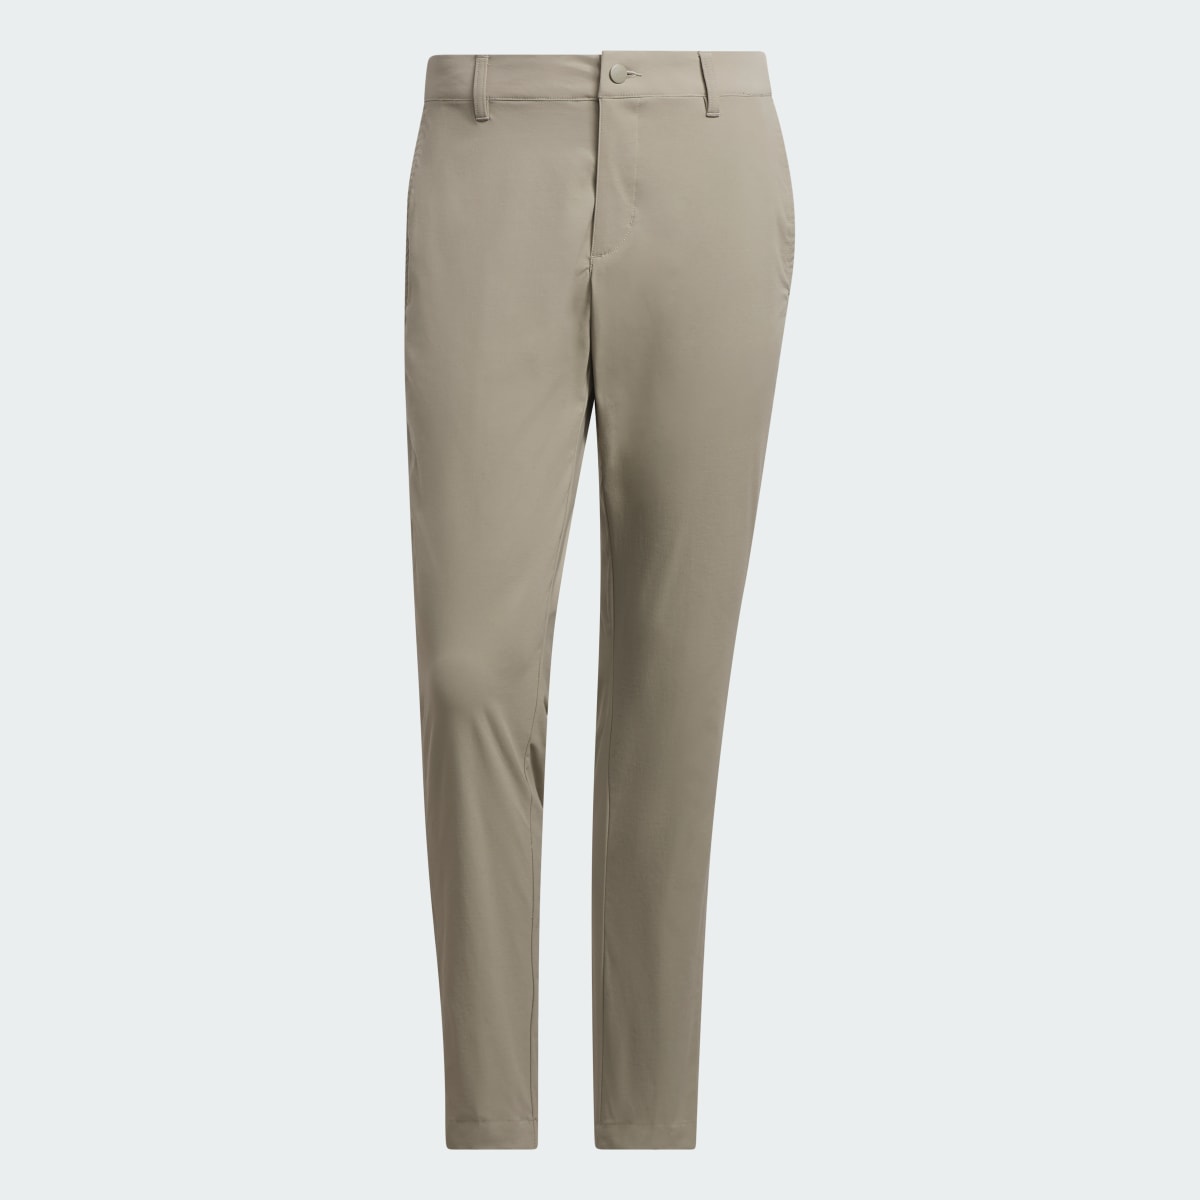 Adidas Ultimate365 Chino Trousers. 4